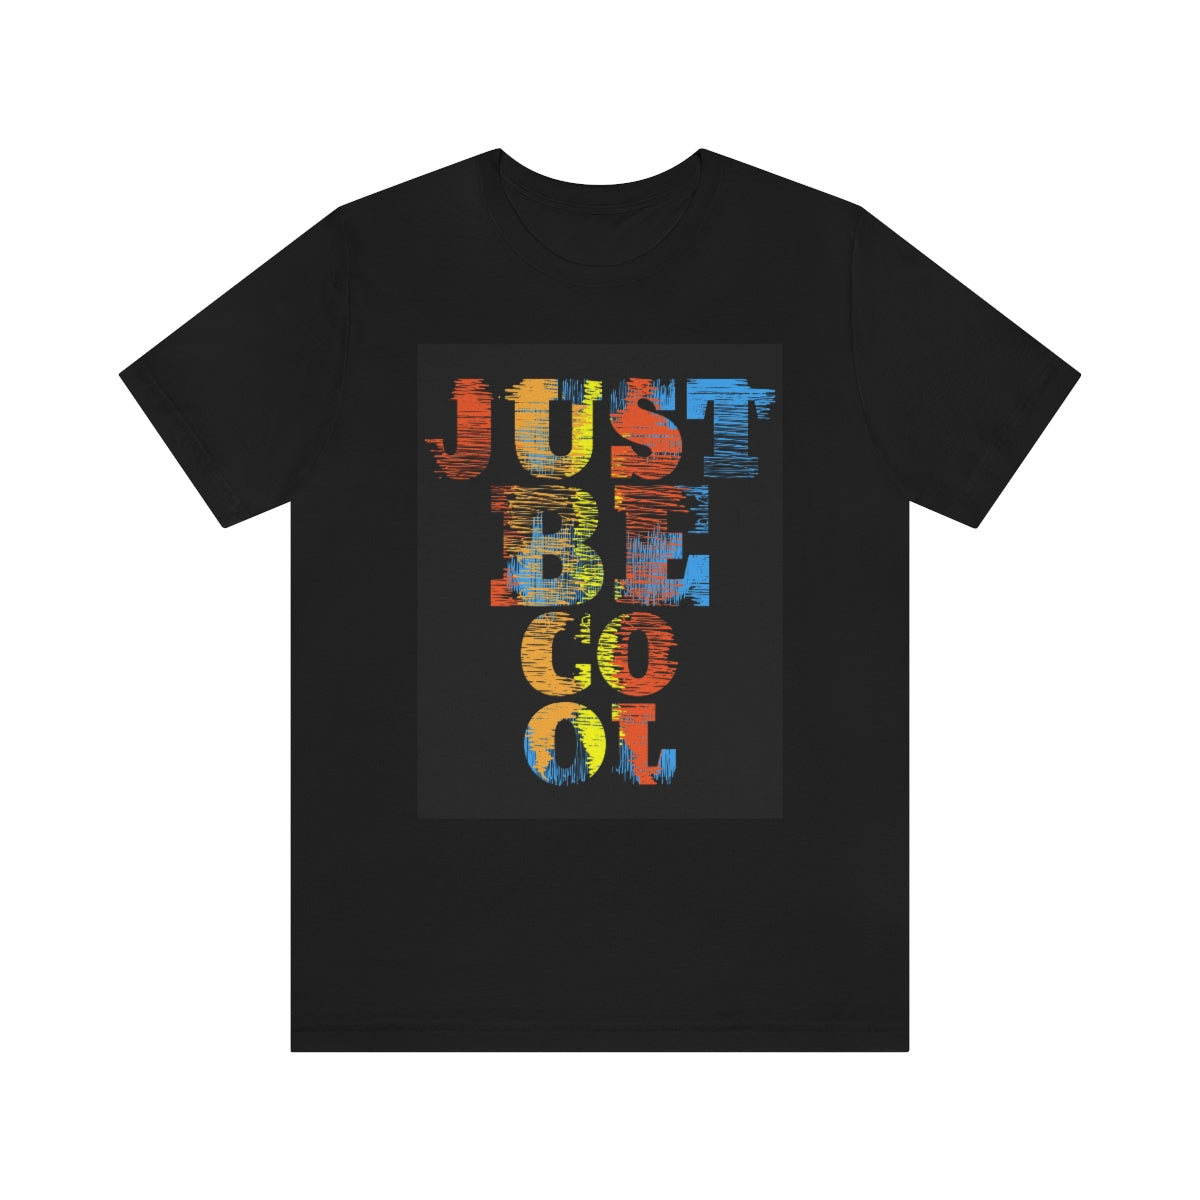 Unisex Jersey Short Sleeve Tee "Just be cool"